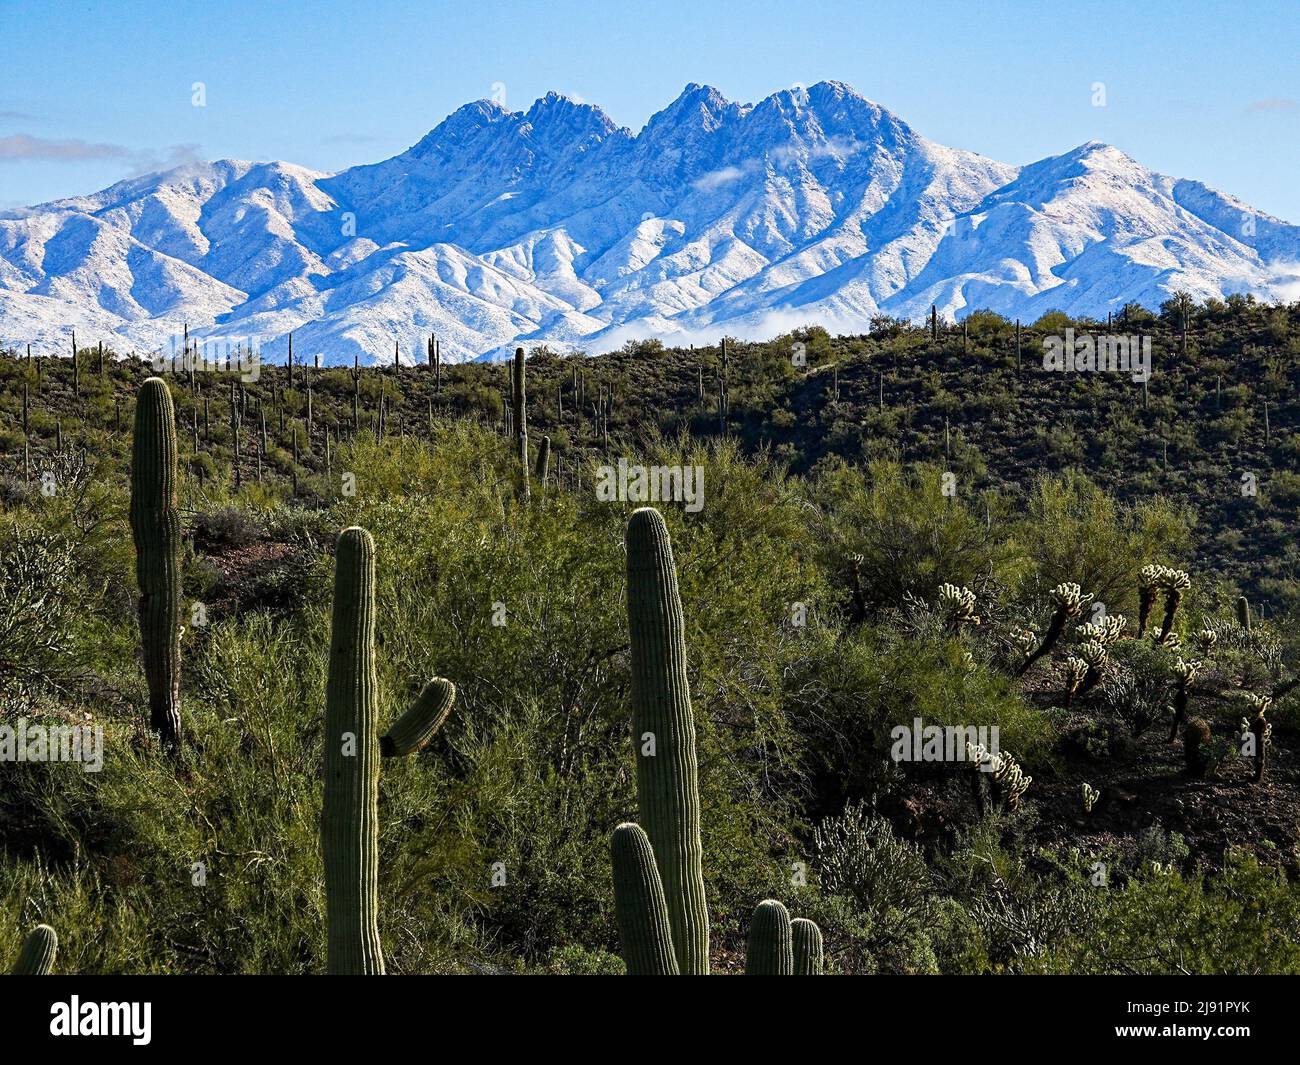 A rare snow event brings snow and fog to Arizona's Four Peaks range during an unusual cold and wet period. Stock Photo